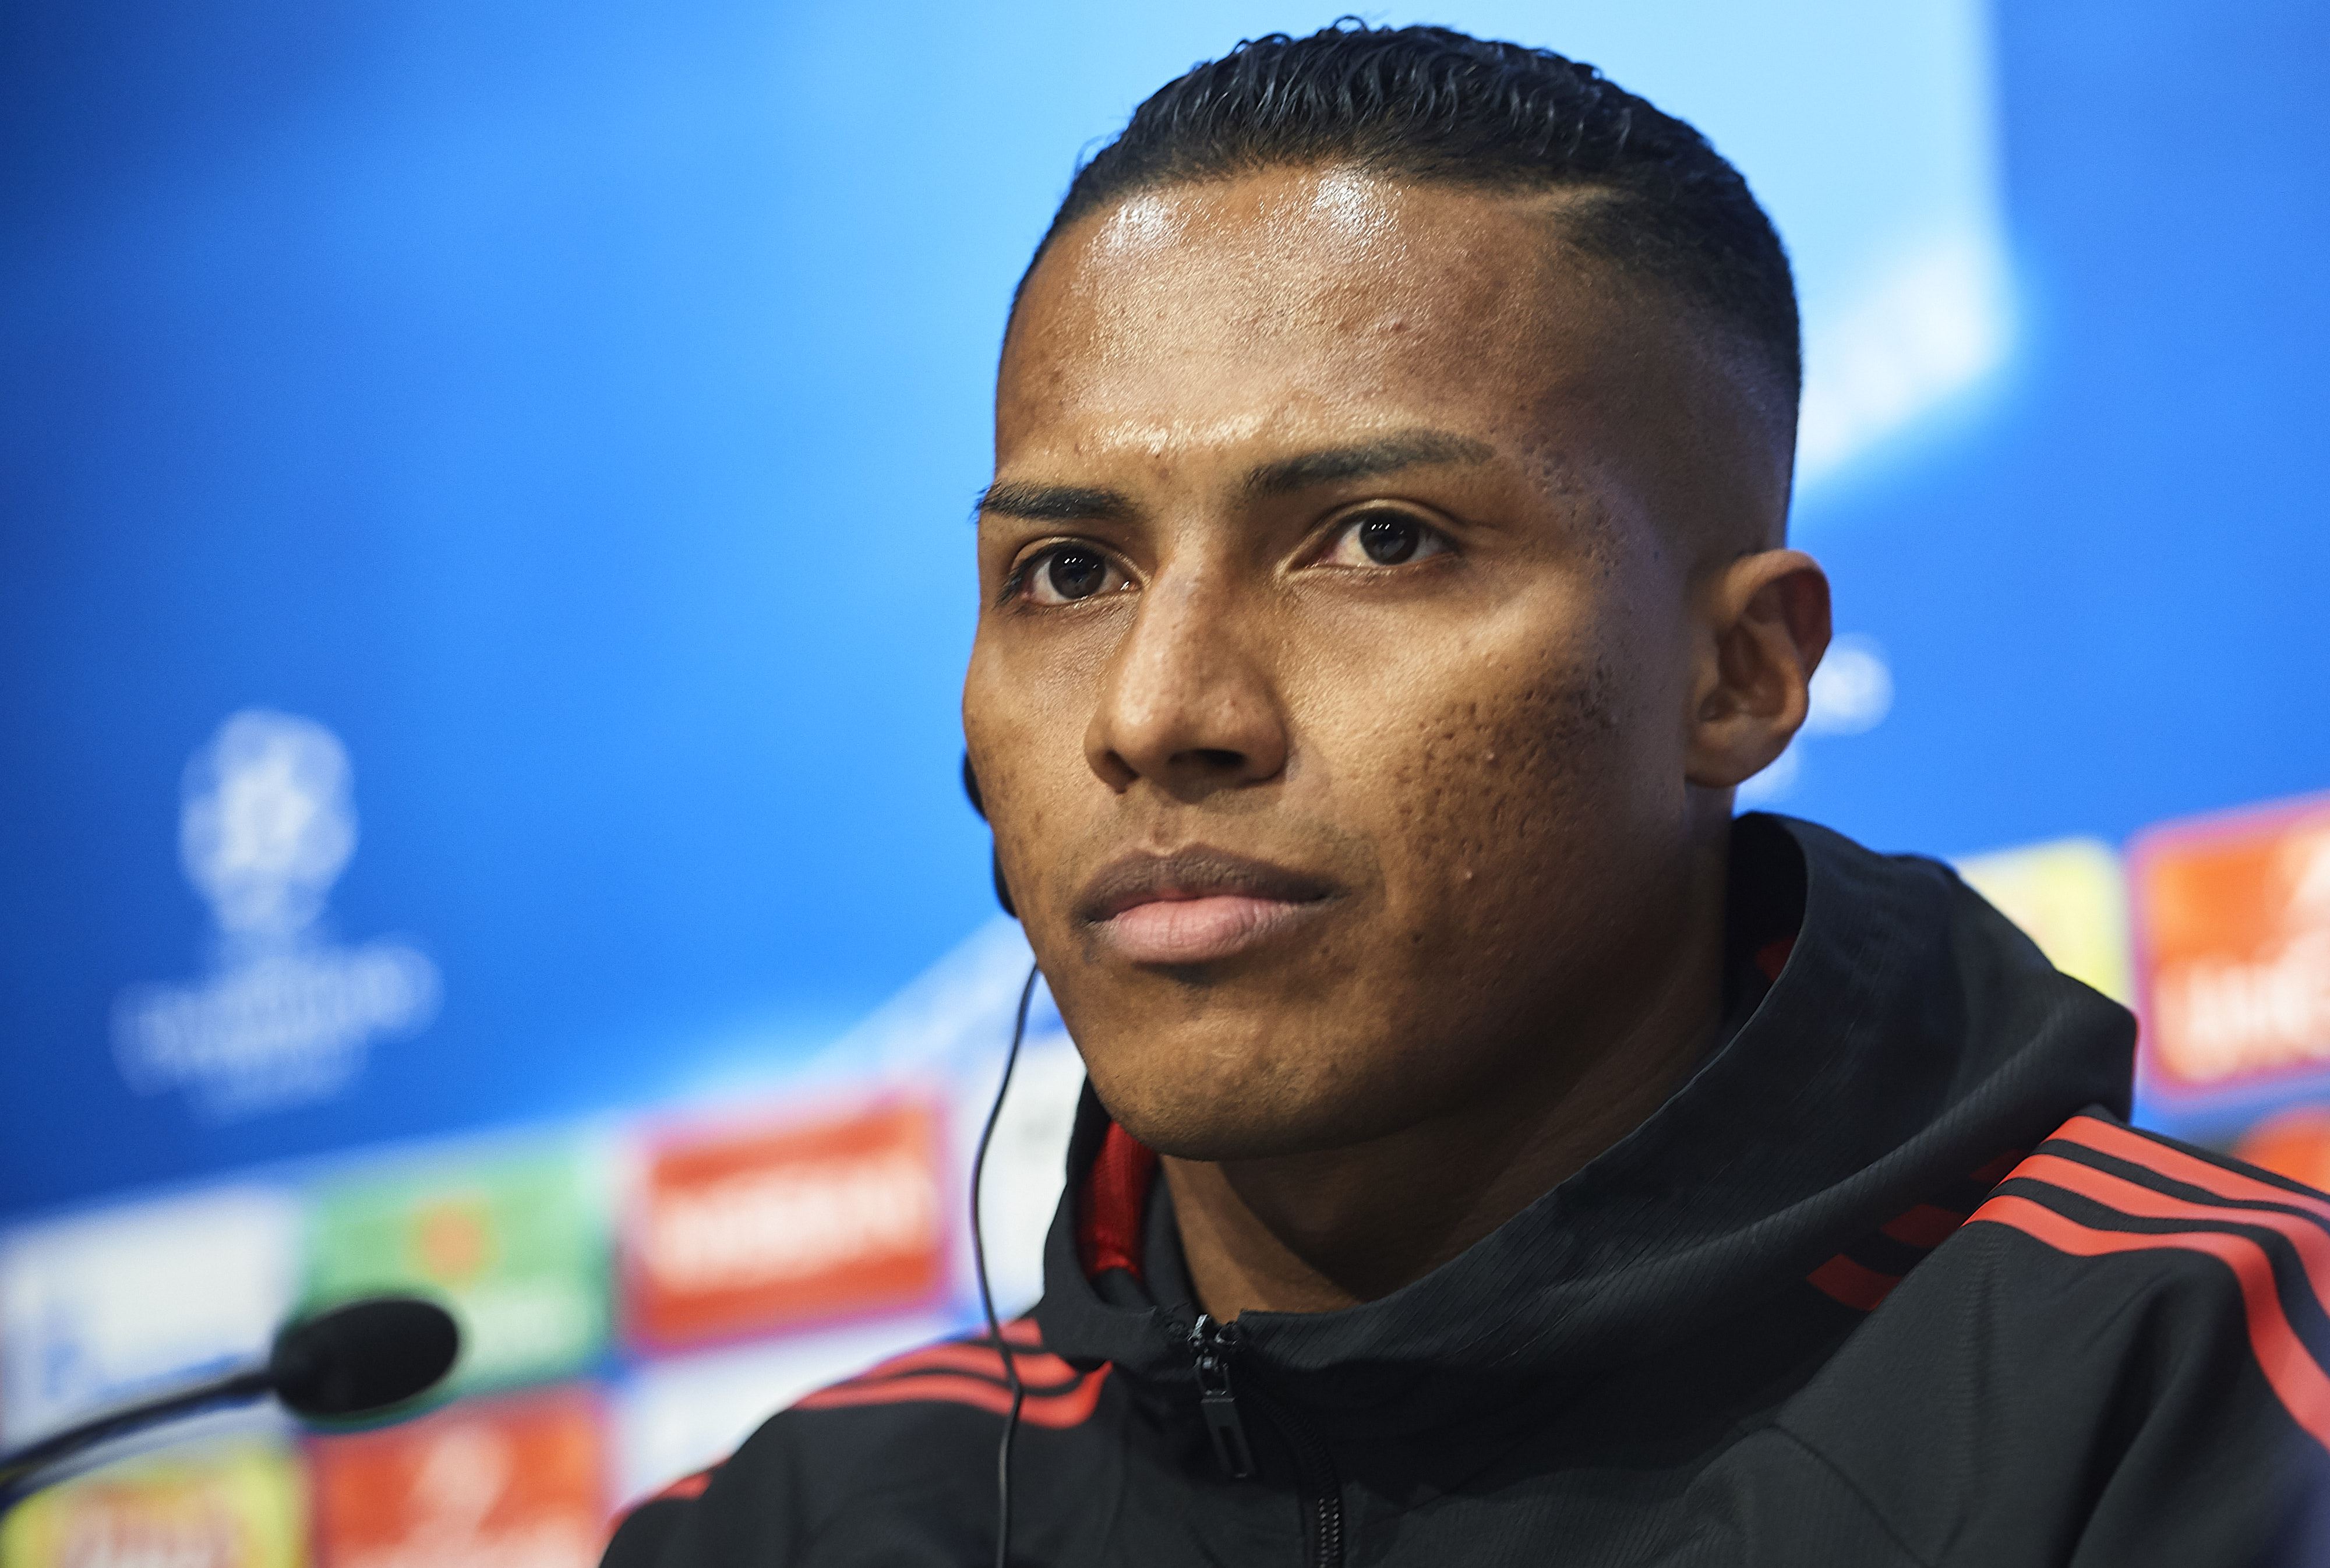 SEVILLE, SPAIN - FEBRUARY 20:  Antonio Valencia of Manchester United attends to the press conference prior to their UEFA Champions match against Sevilla FC at Estadio Ramon Sanchez Pizjuan on February 20, 2018 in Seville, Spain.  (Photo by Aitor Alcalde/Getty Images)